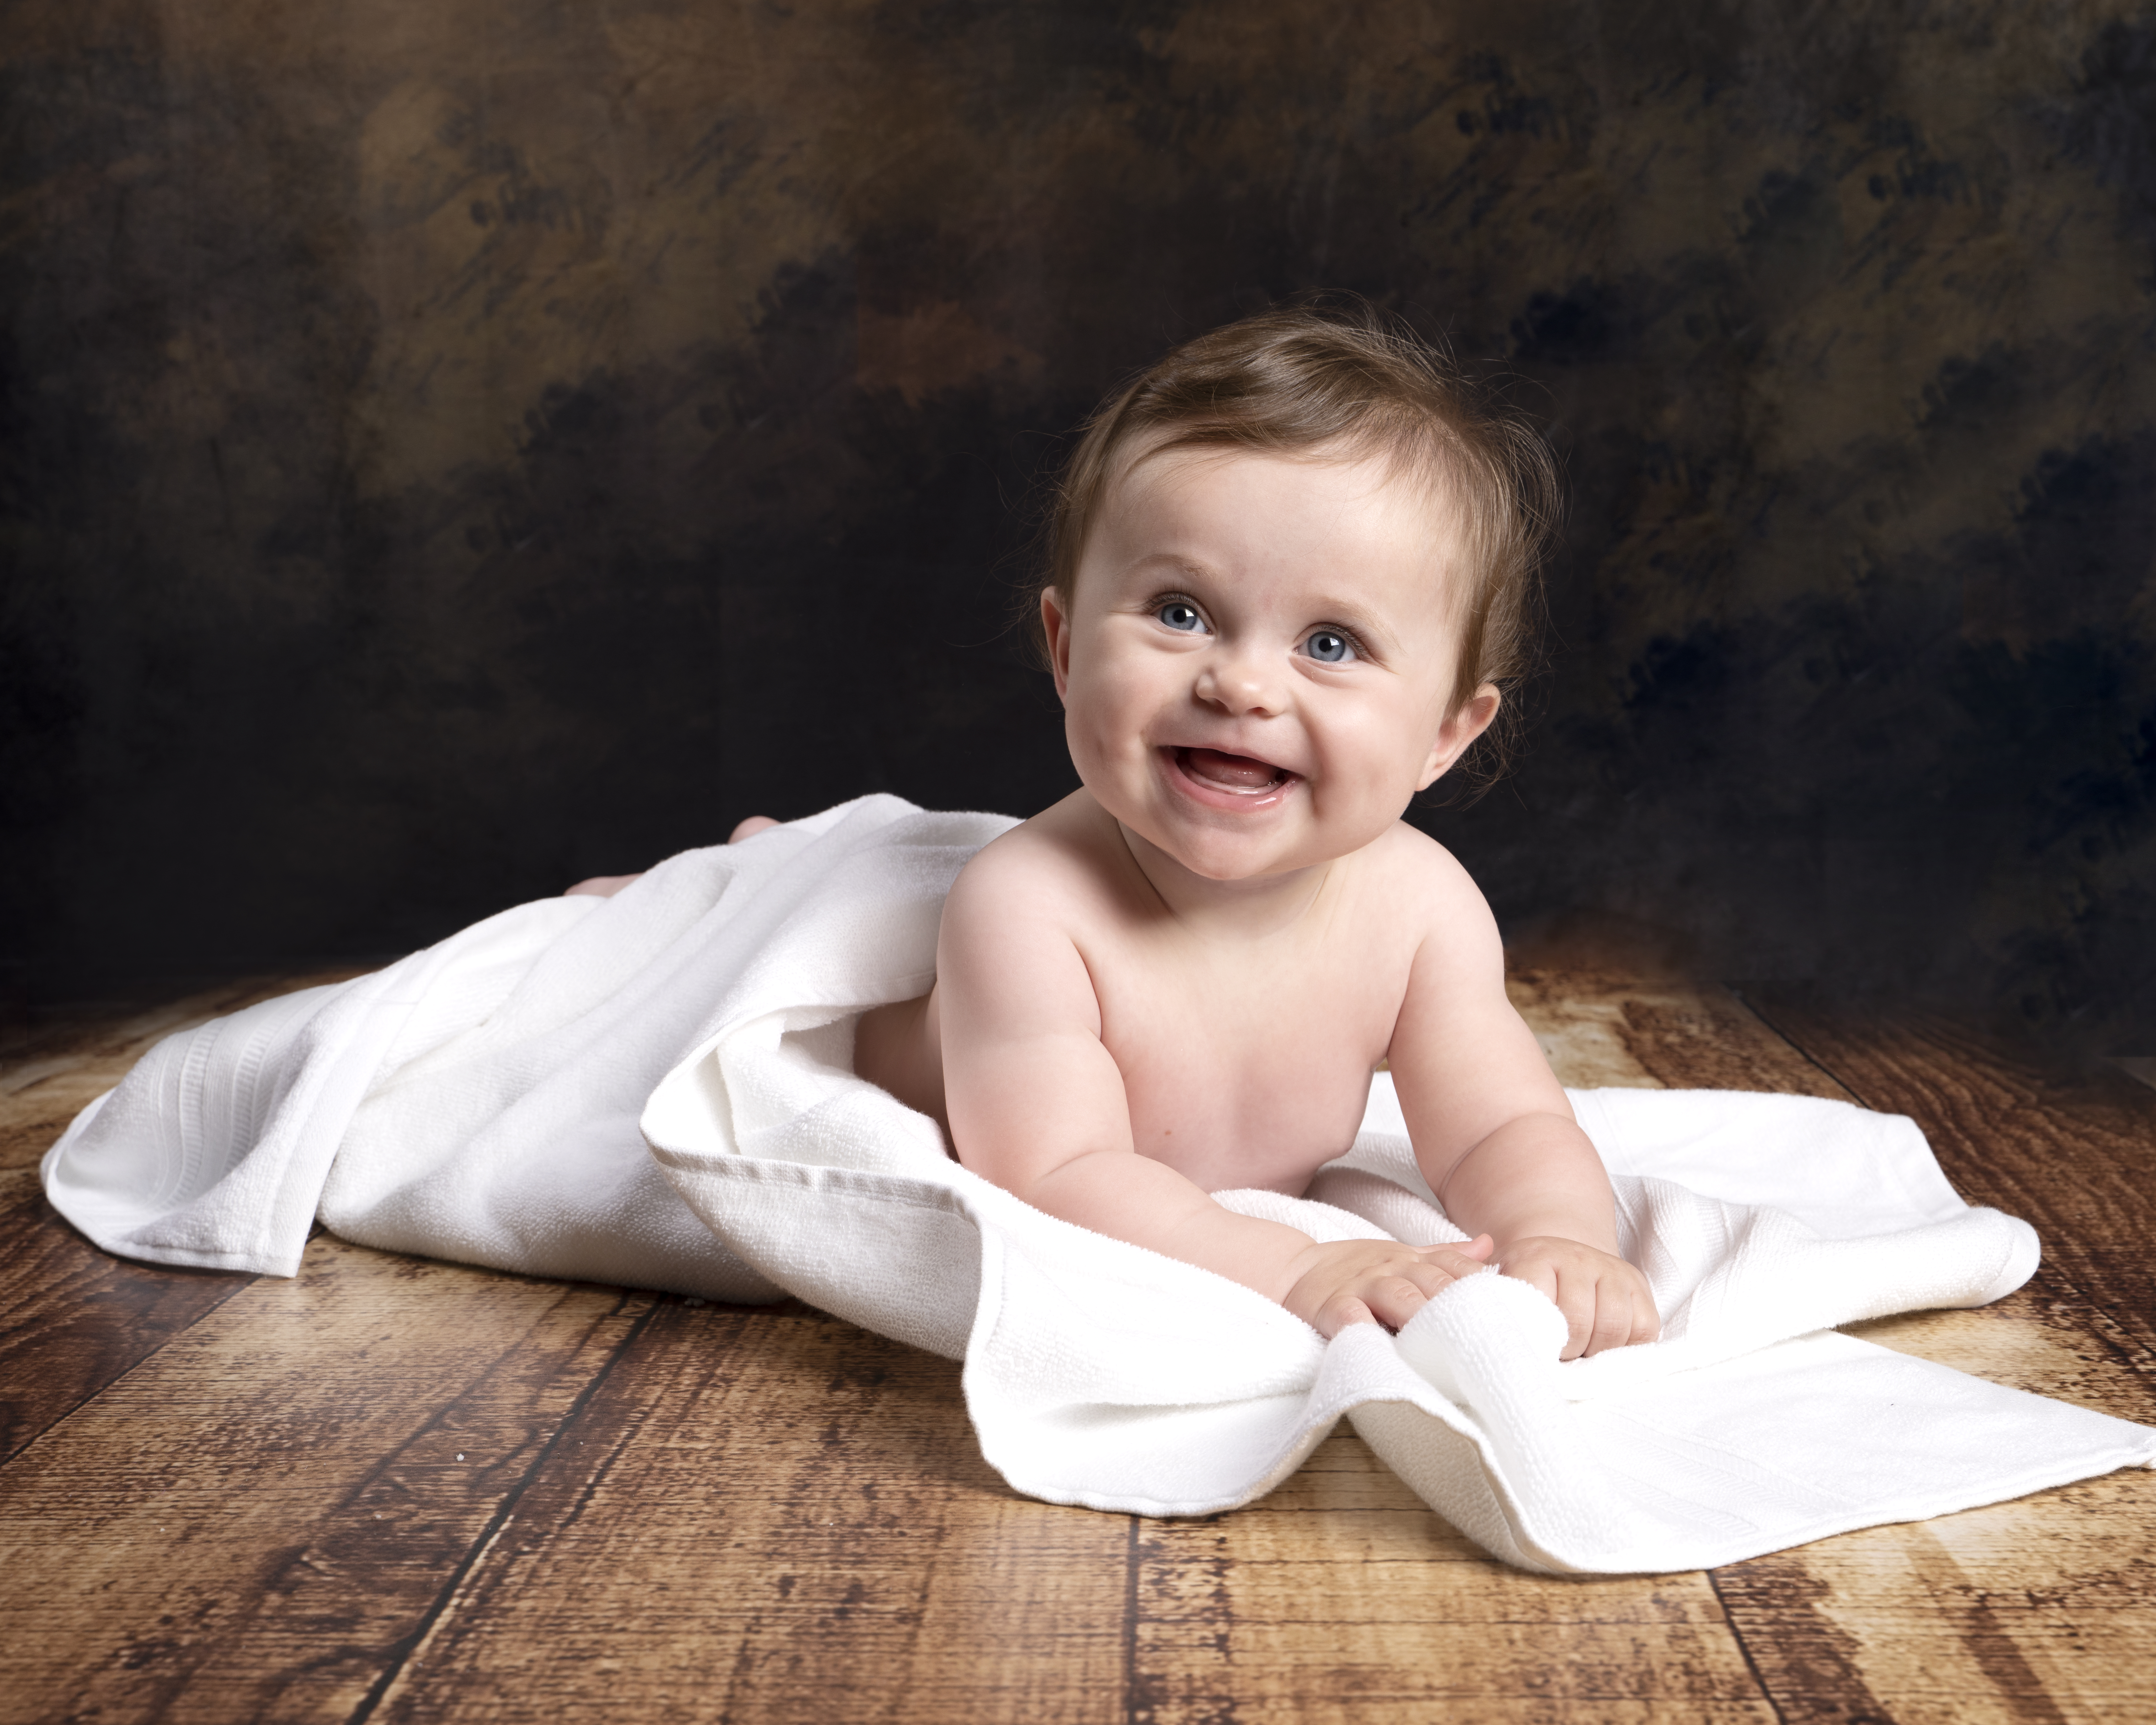 6 Month old photo shoot in bath towels